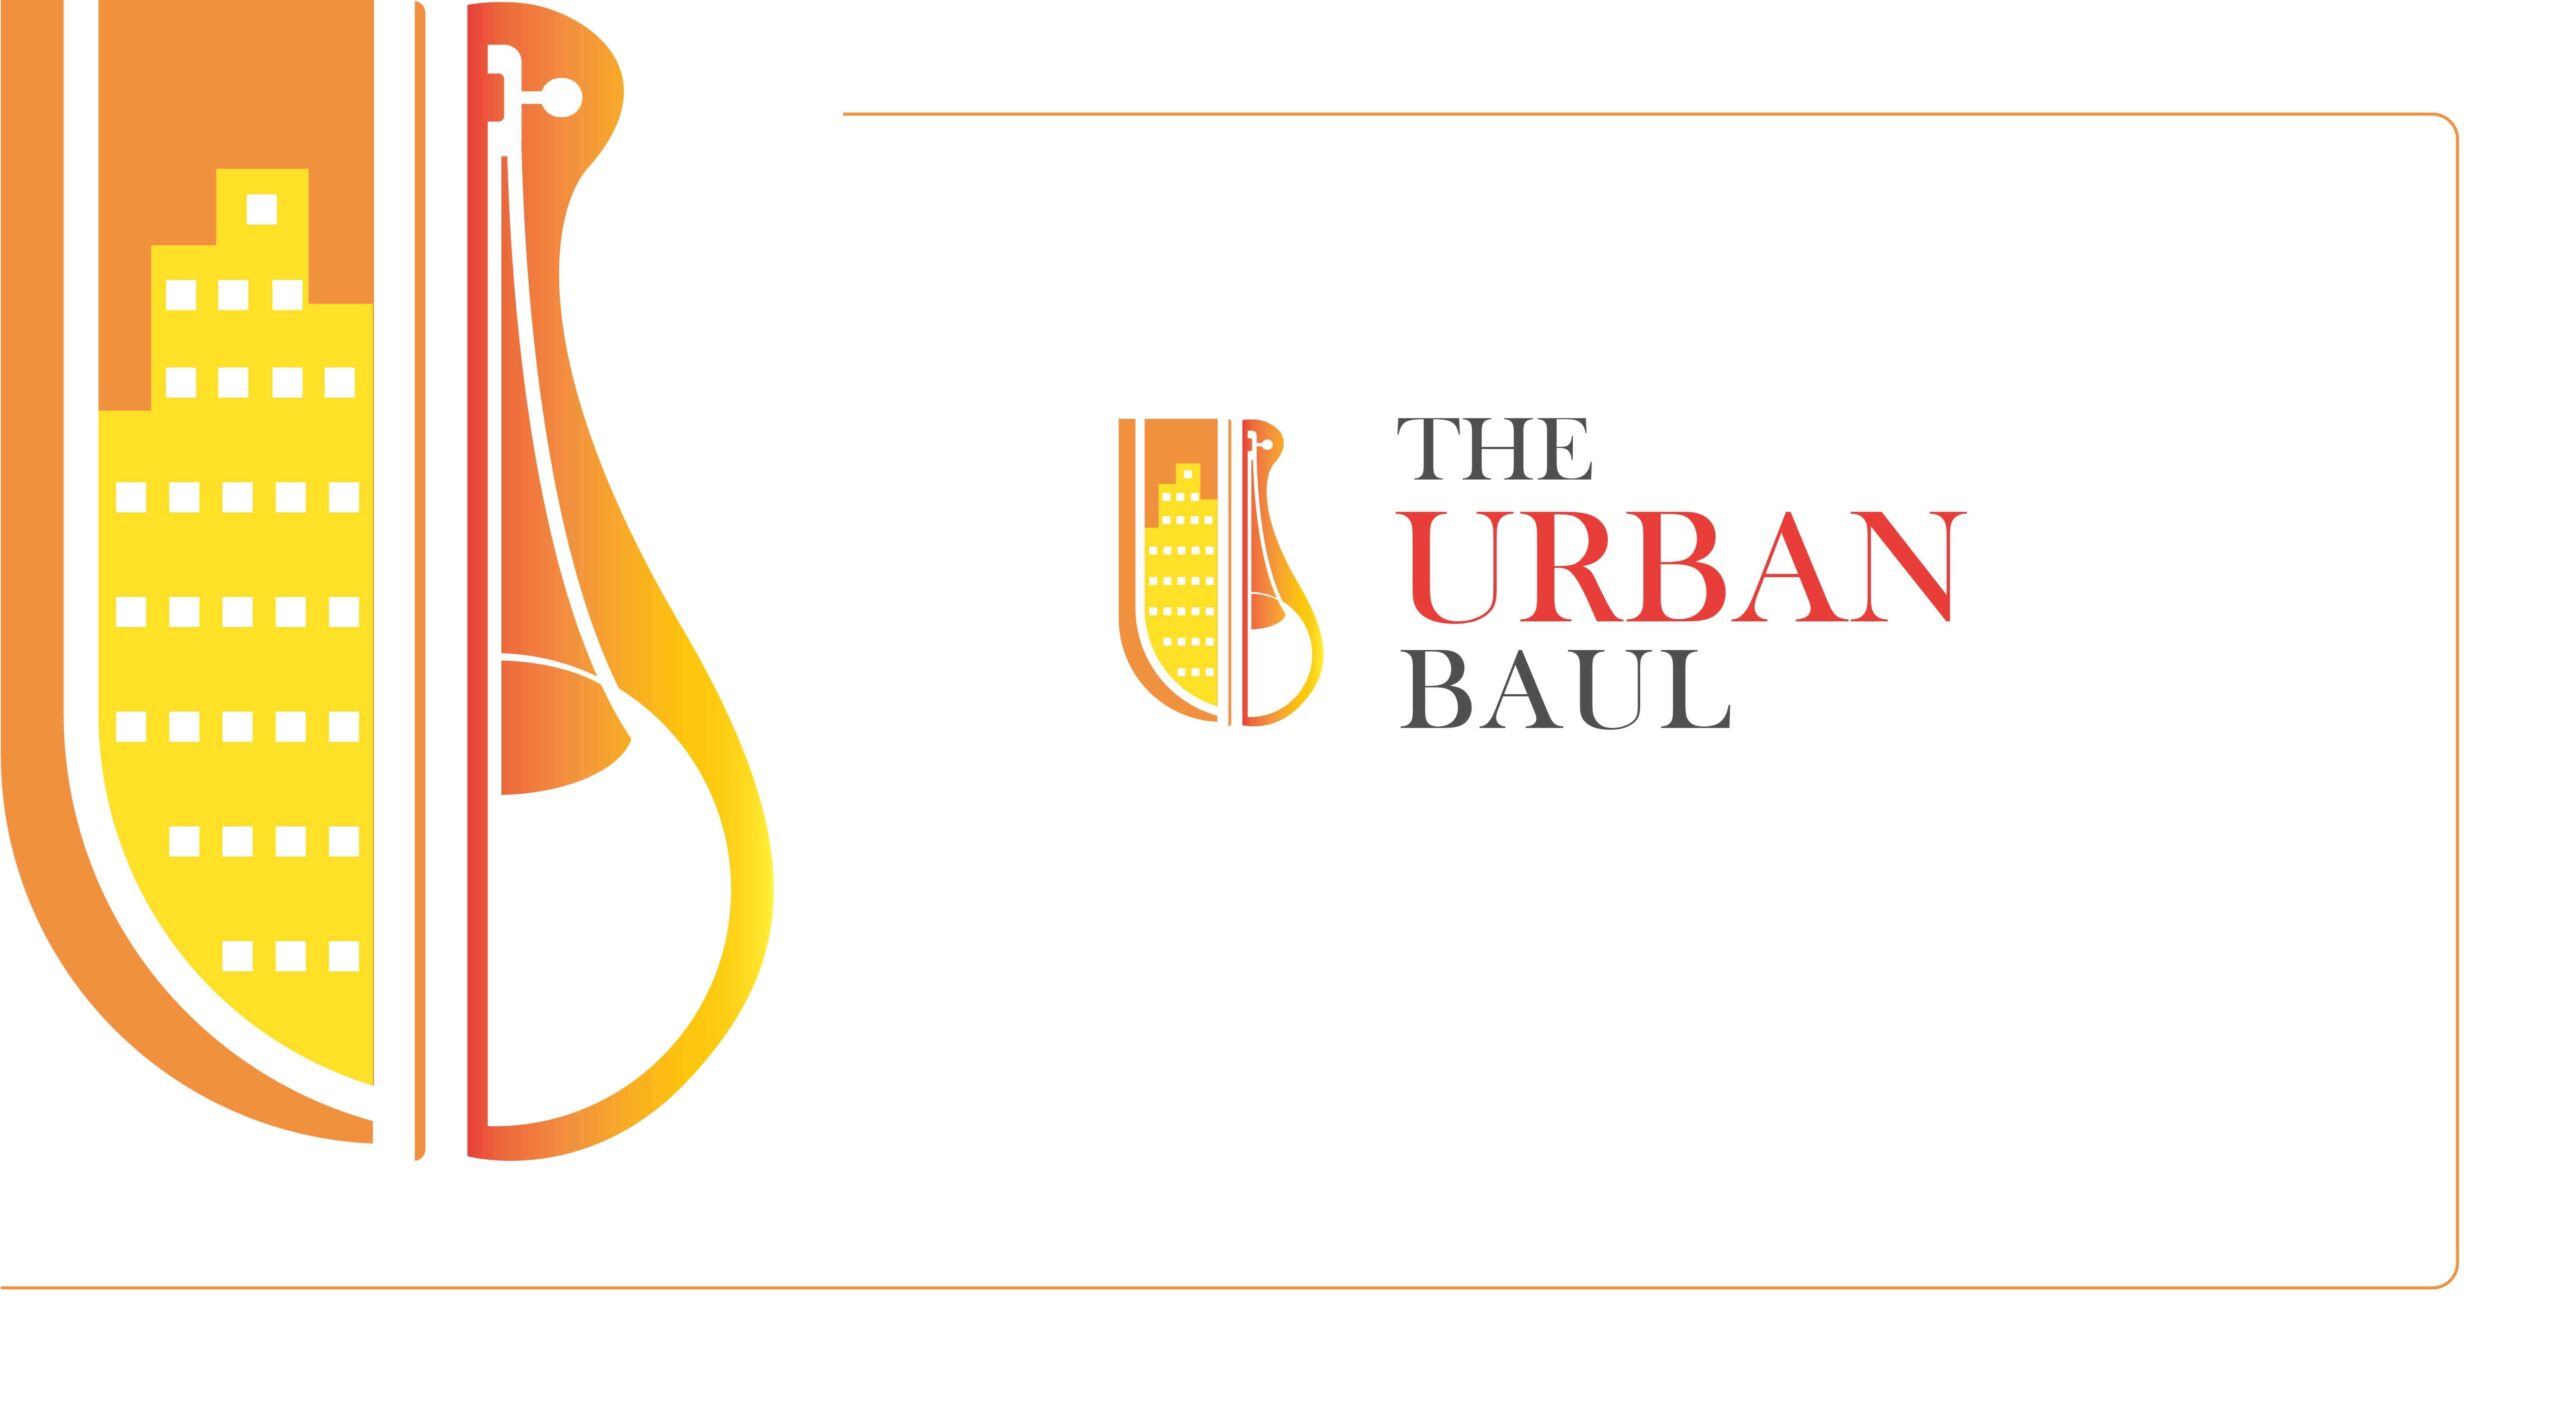 theurbanbaul branding guide 1 scaled